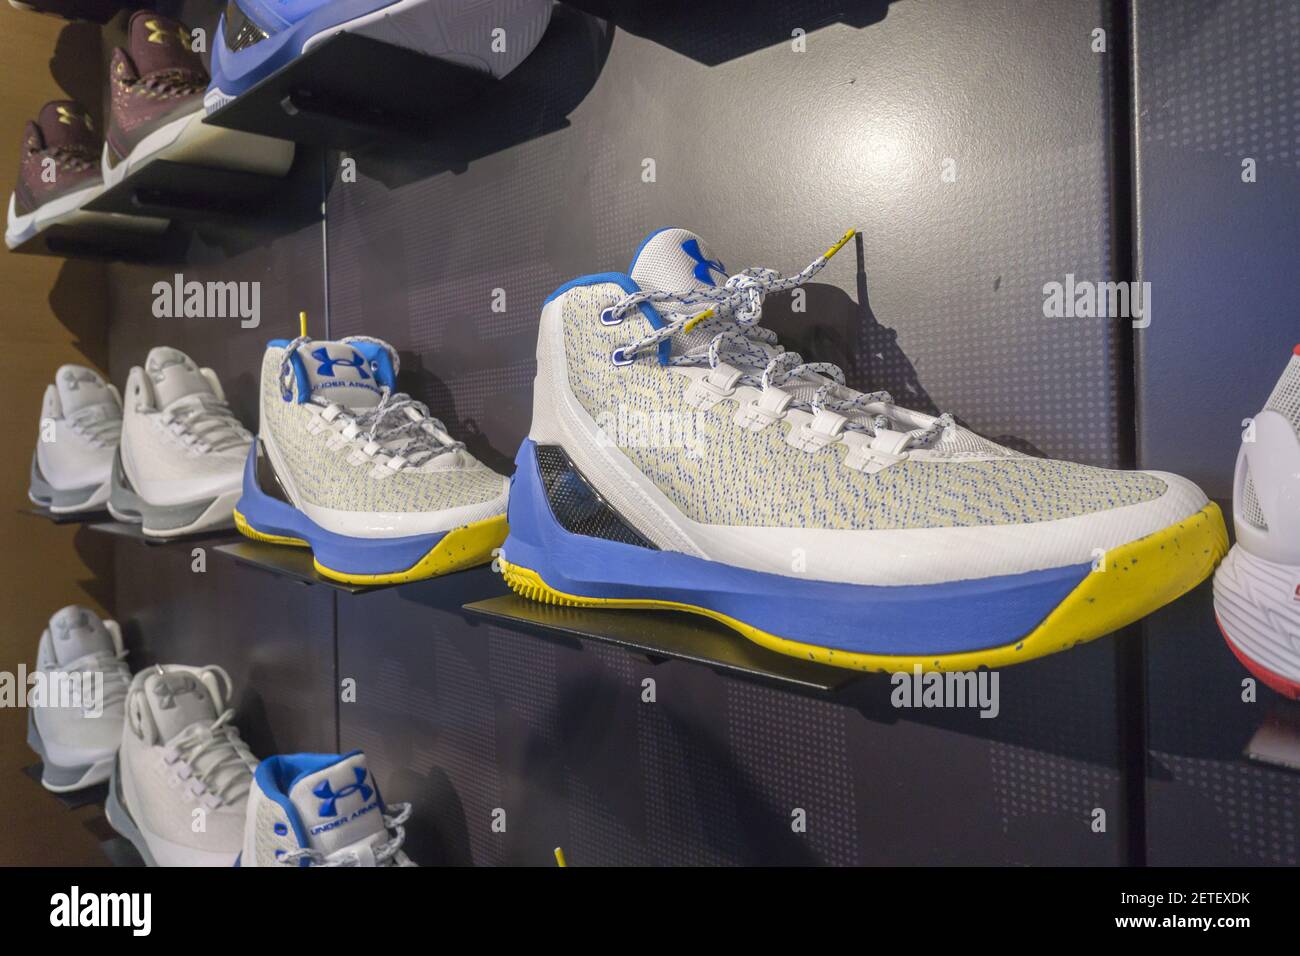 Steph Curry sneakers in the Under Armour store in the Westfield World Trade  Center Oculus mall in New York on Saturday, February 11, 2017. Under  Armour's celebrity endorsers, basketball player Steph Curry,